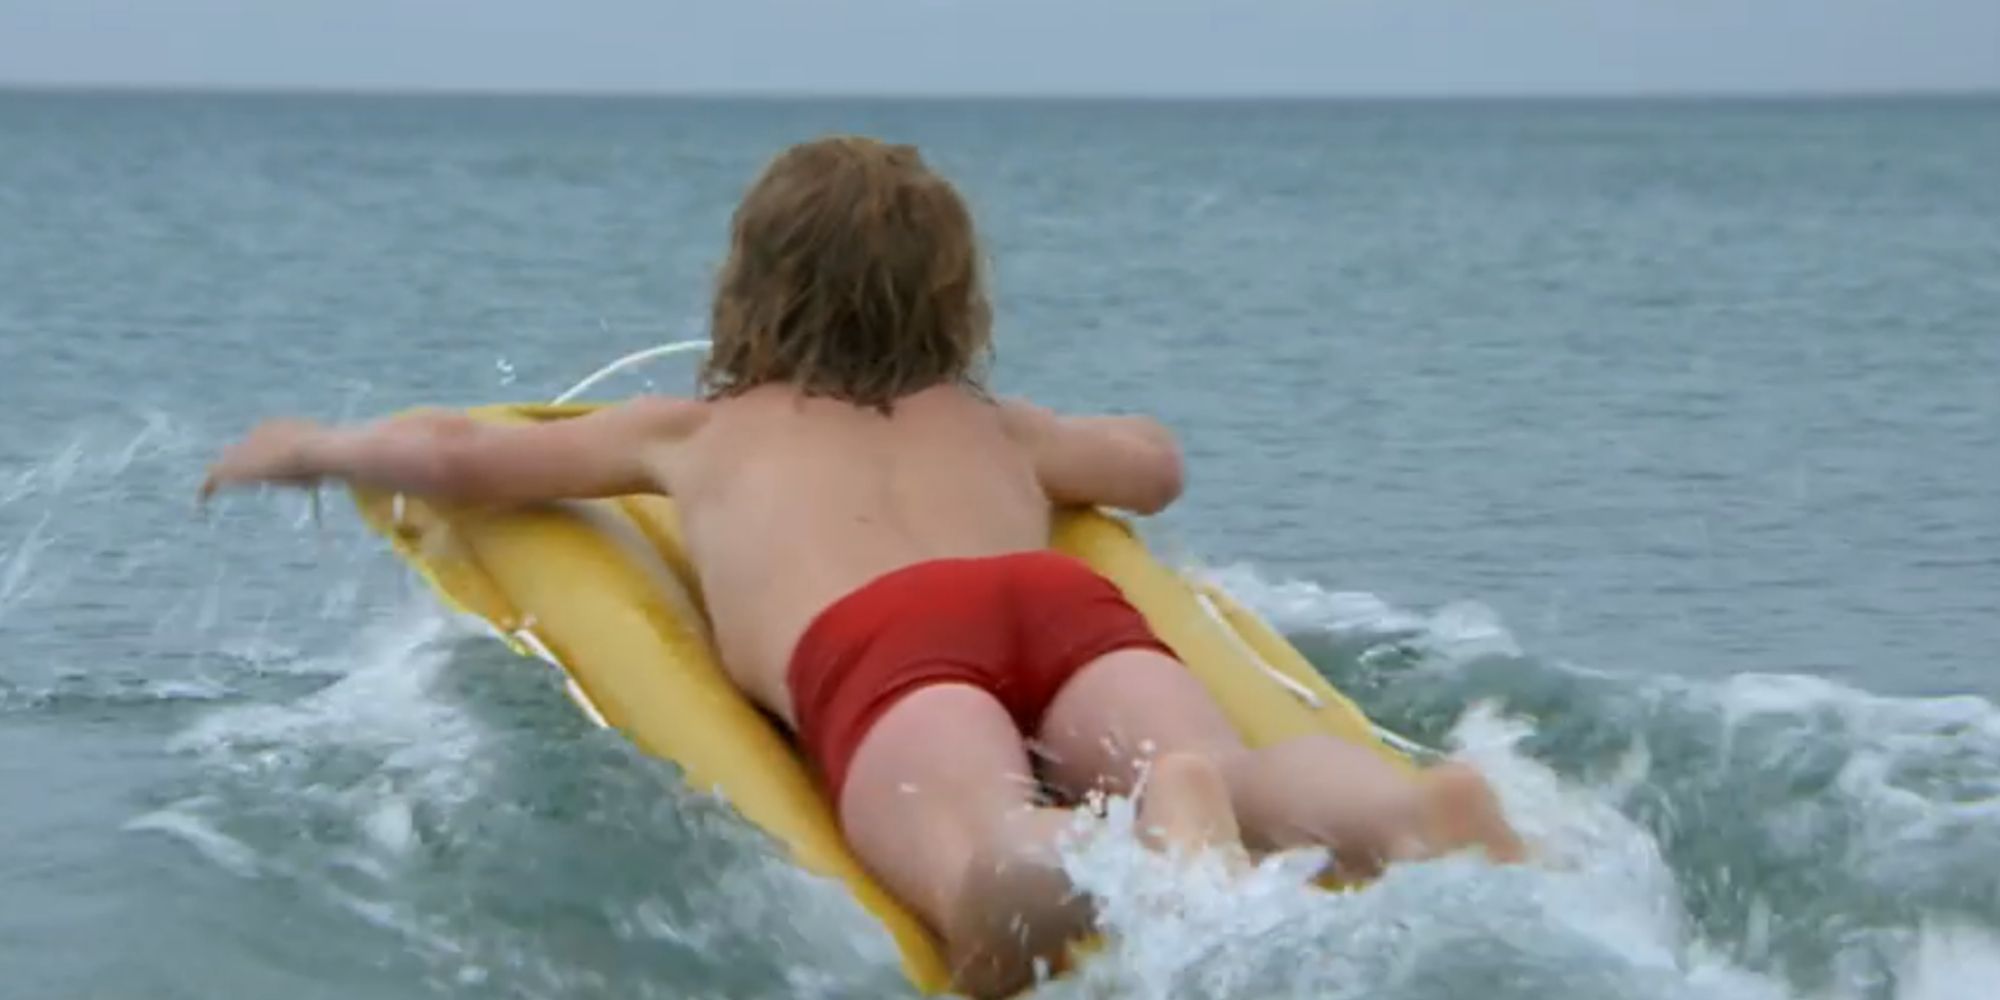 Alex Kintner going out into the ocean in Jaws (1975)